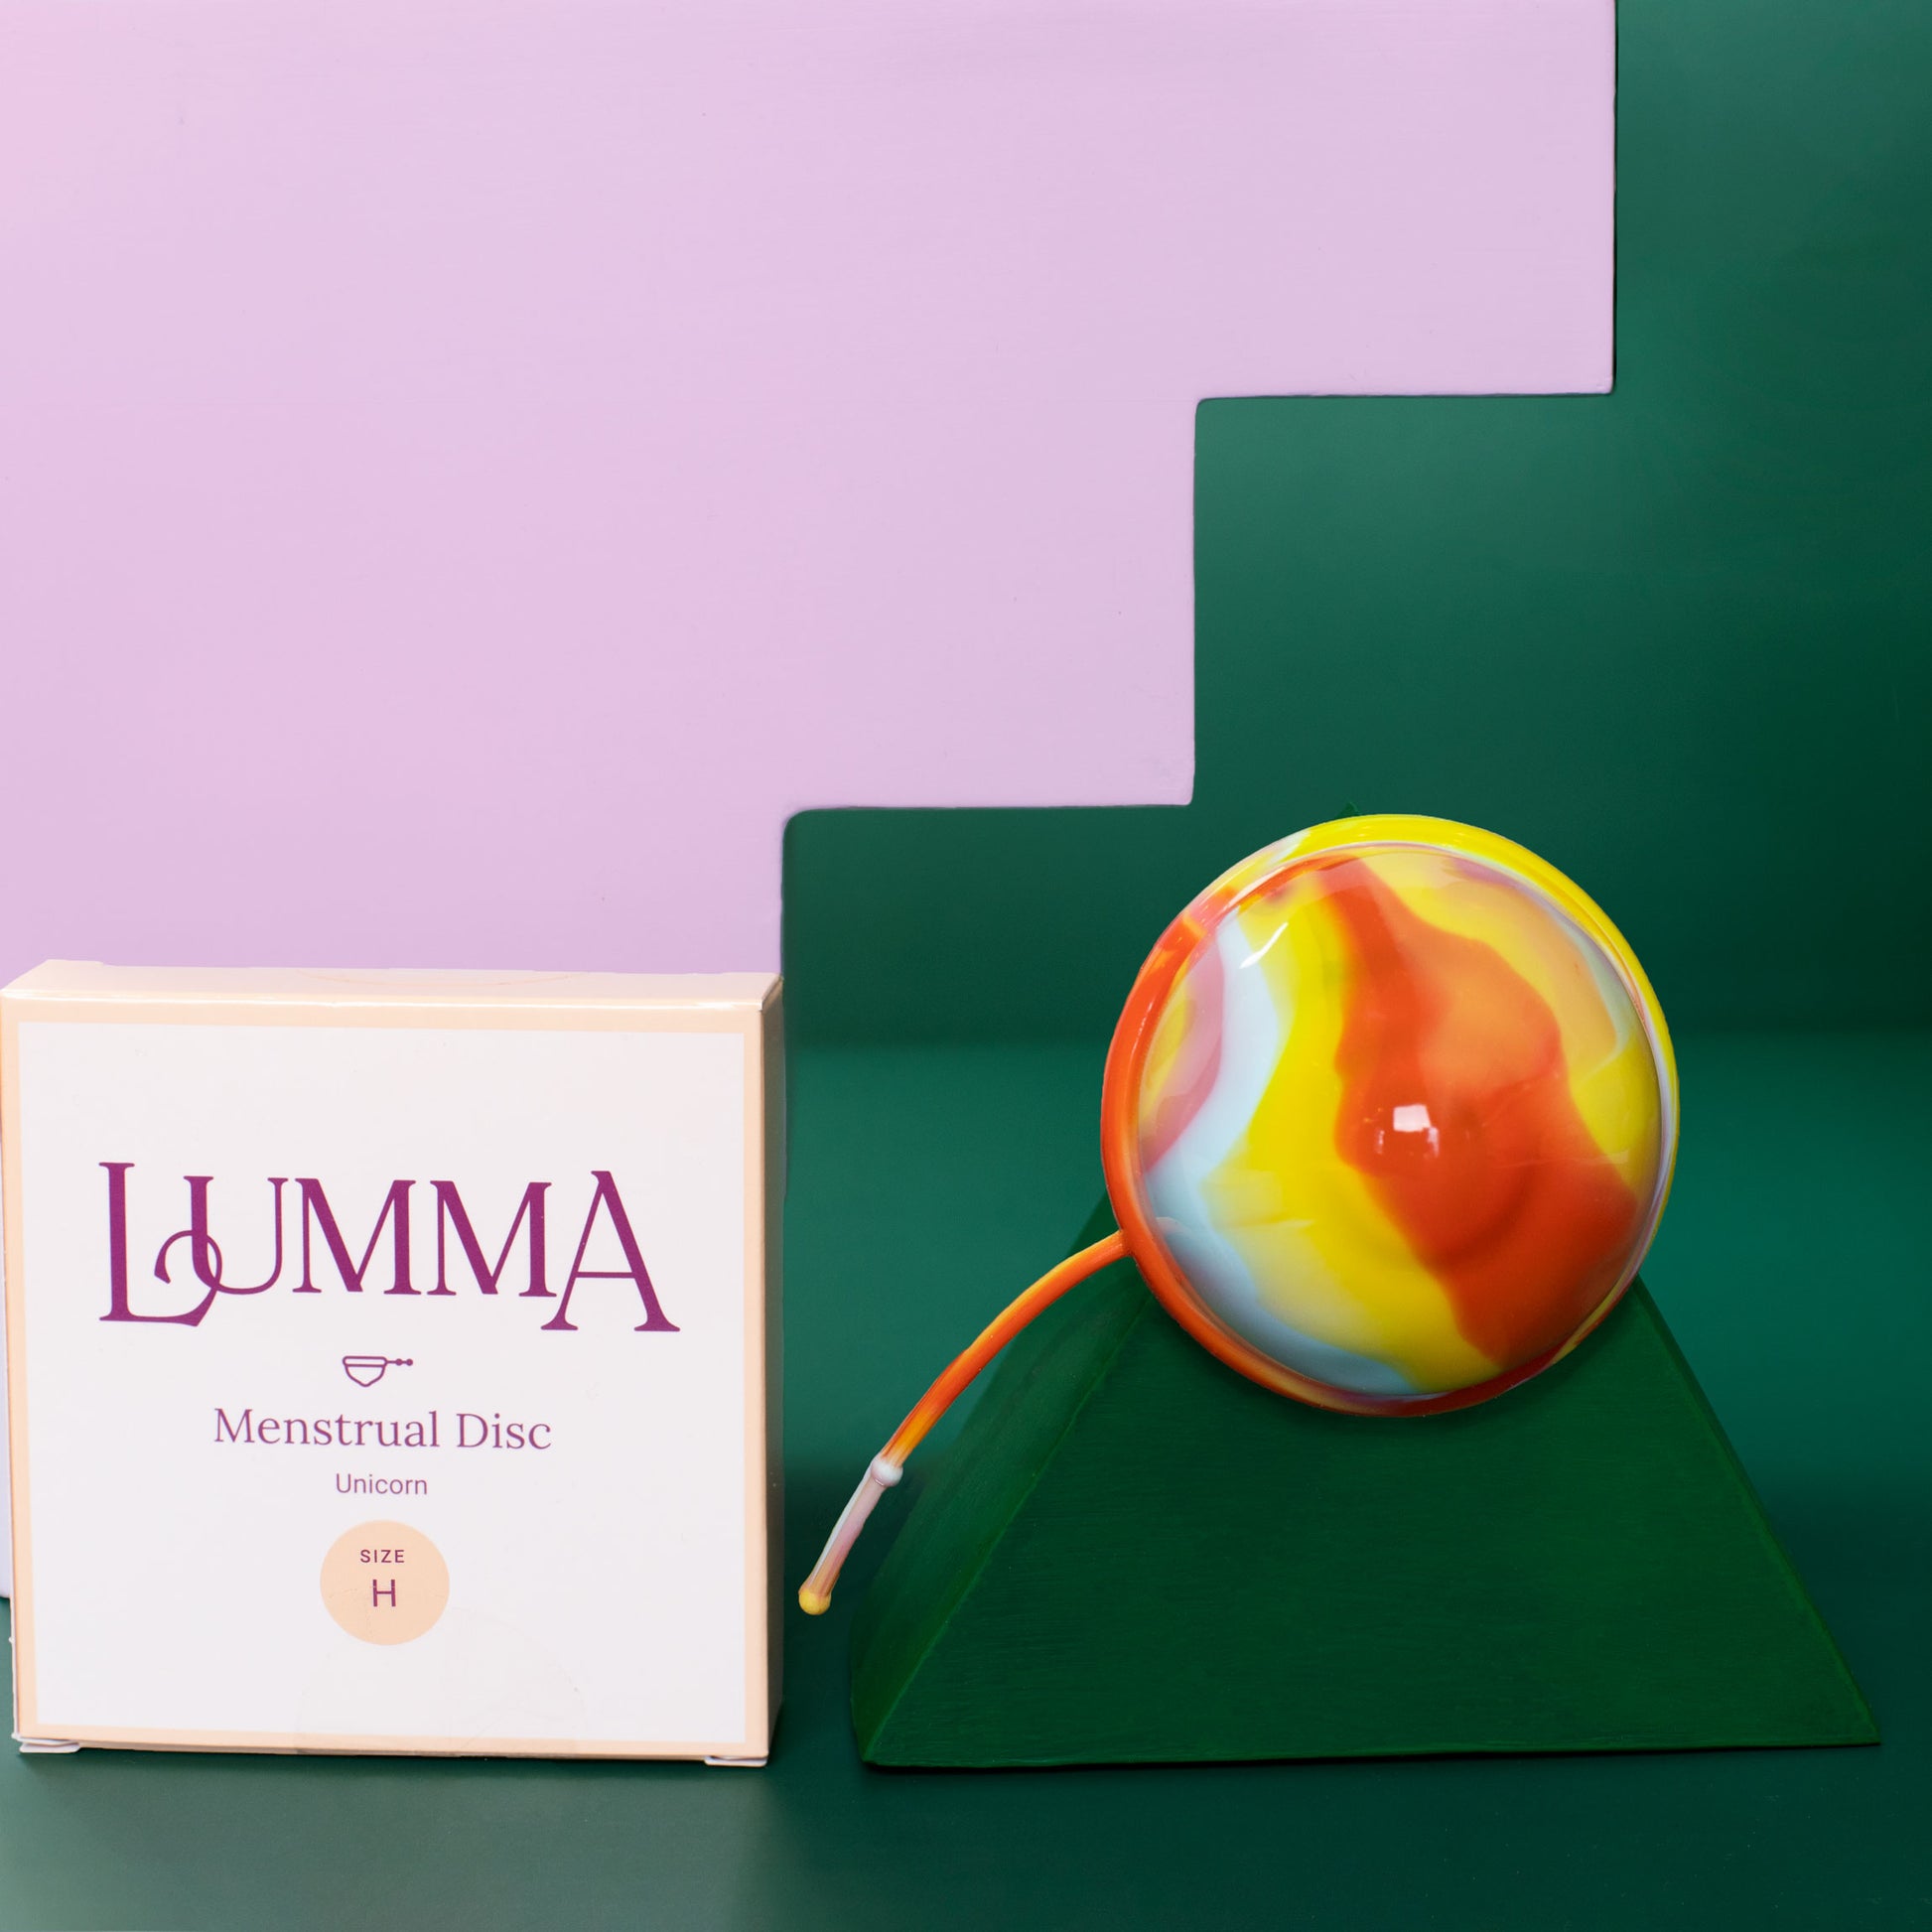 Lumma menstrual disc size Large High in unicorn with packaging